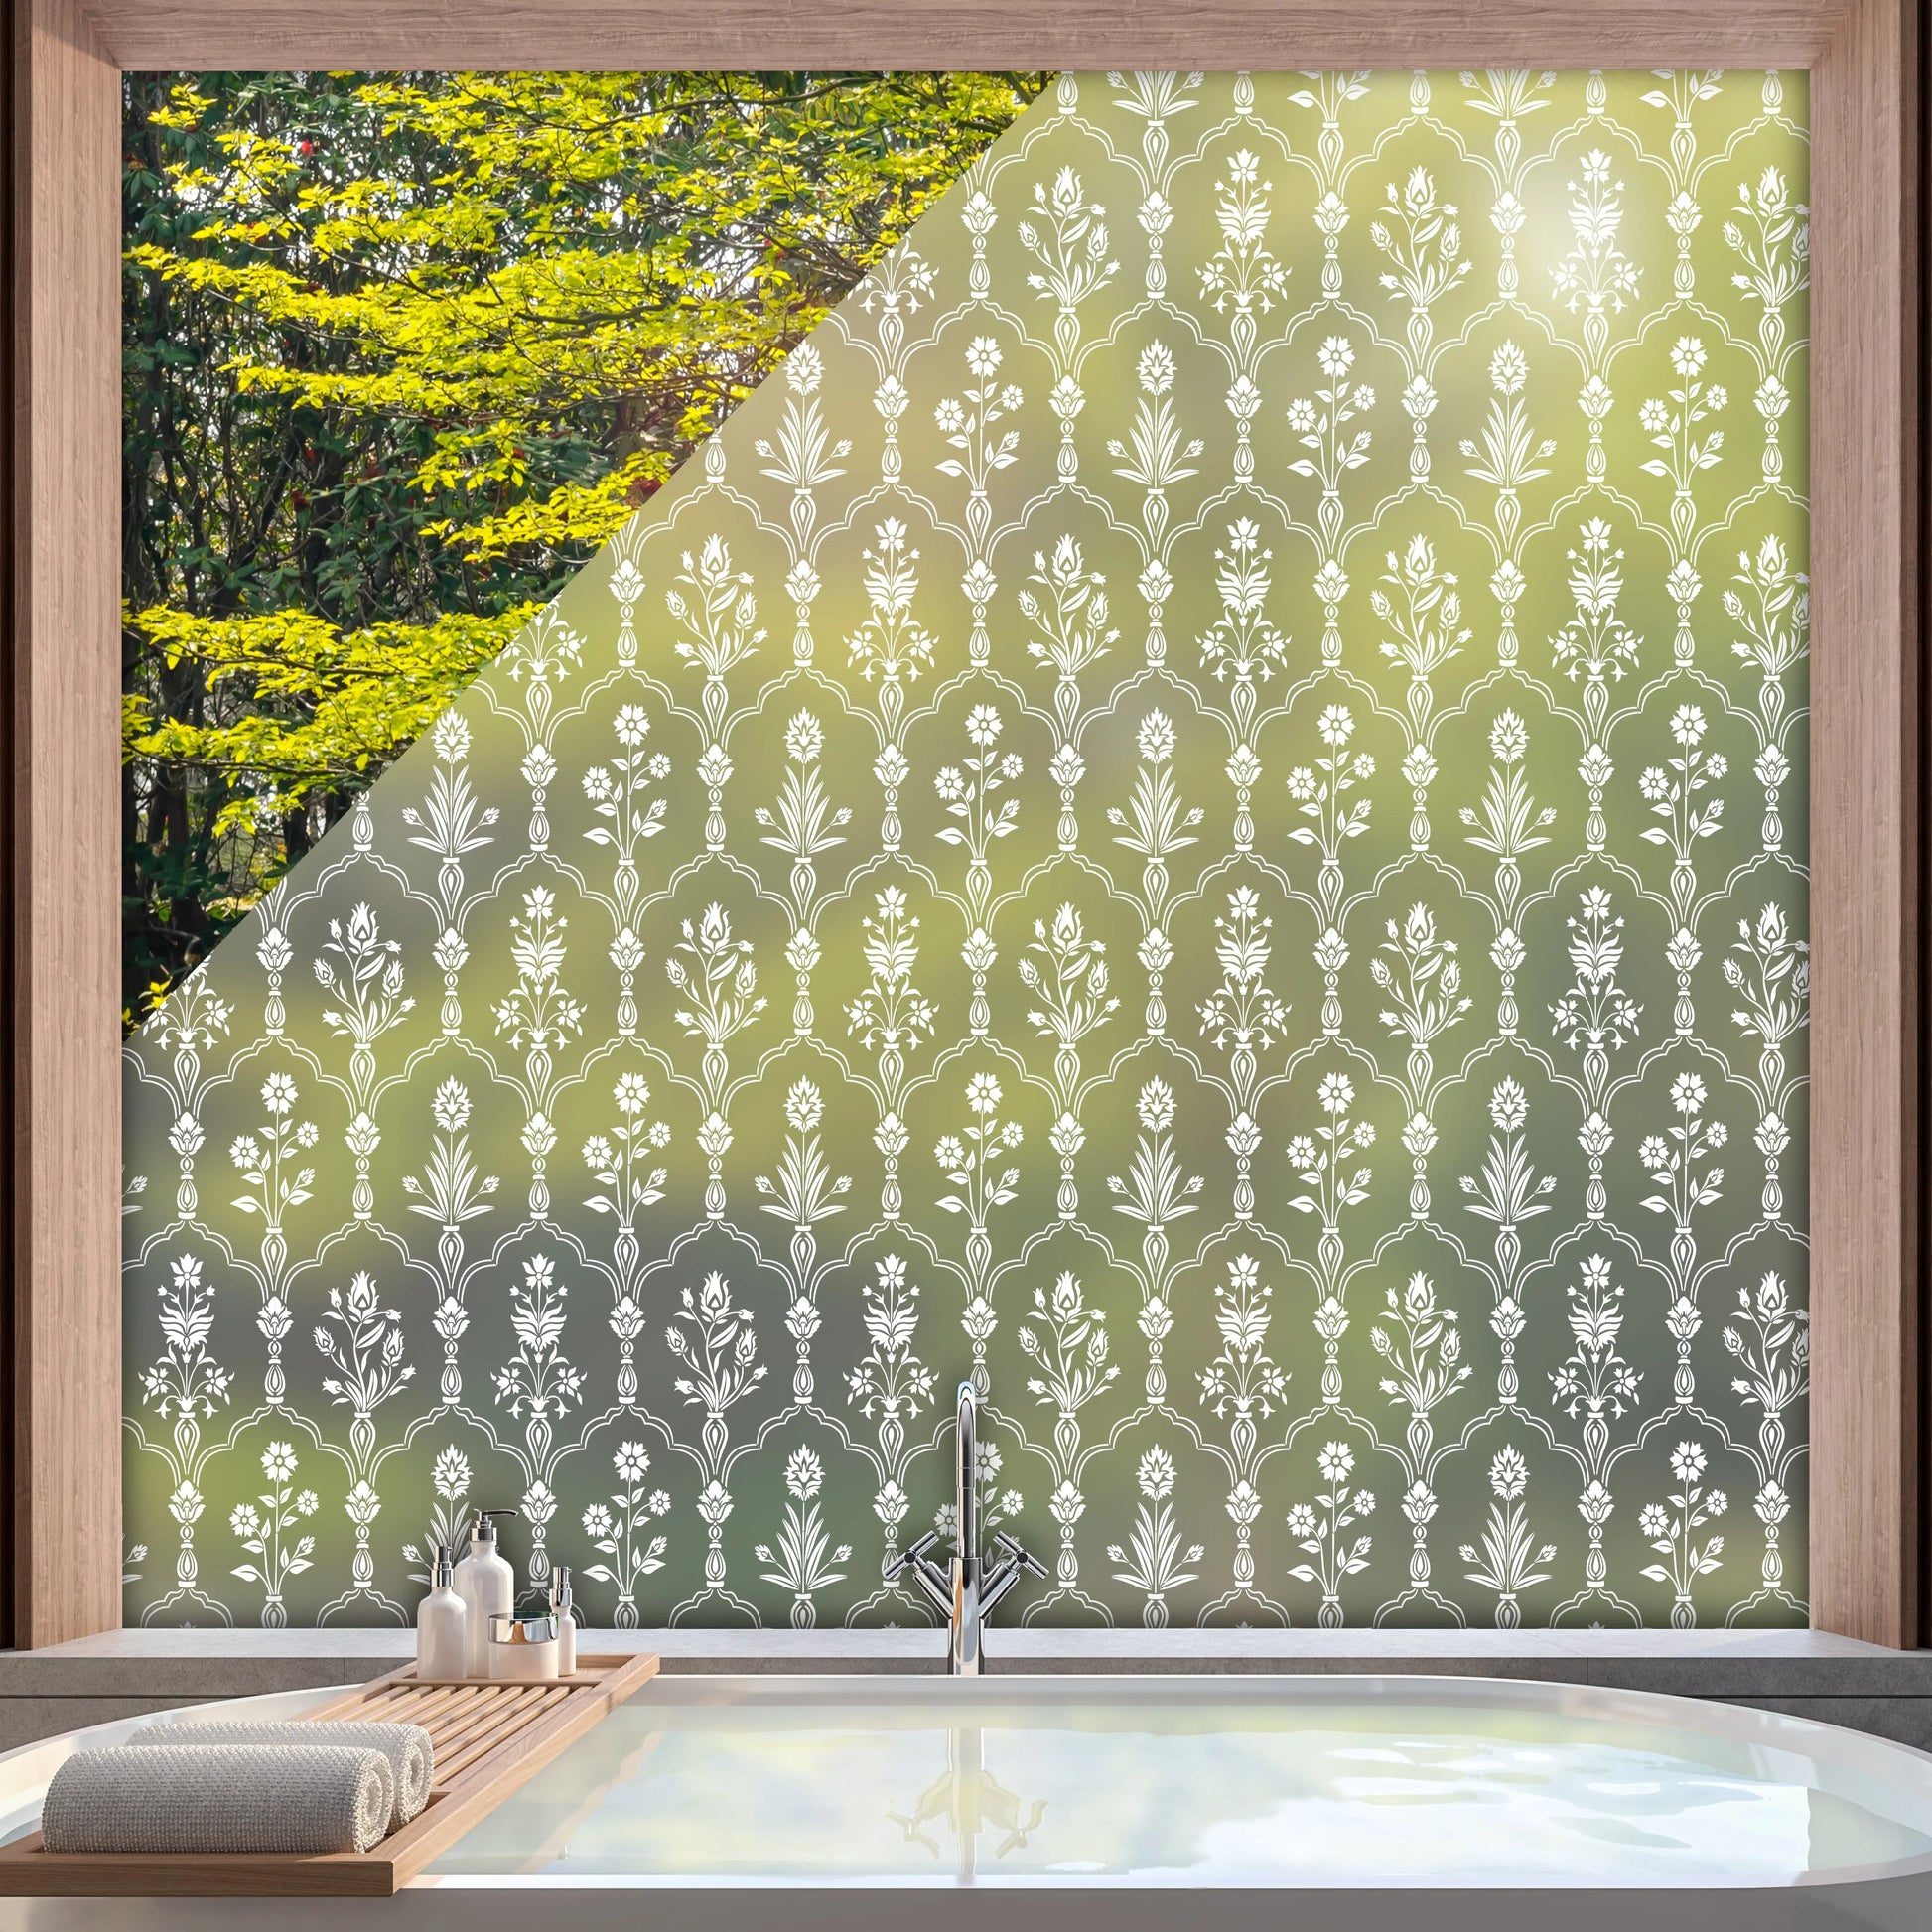 Privacy Window Hamedan Frosted Window Privacy Panel Dizzy Duck Designs